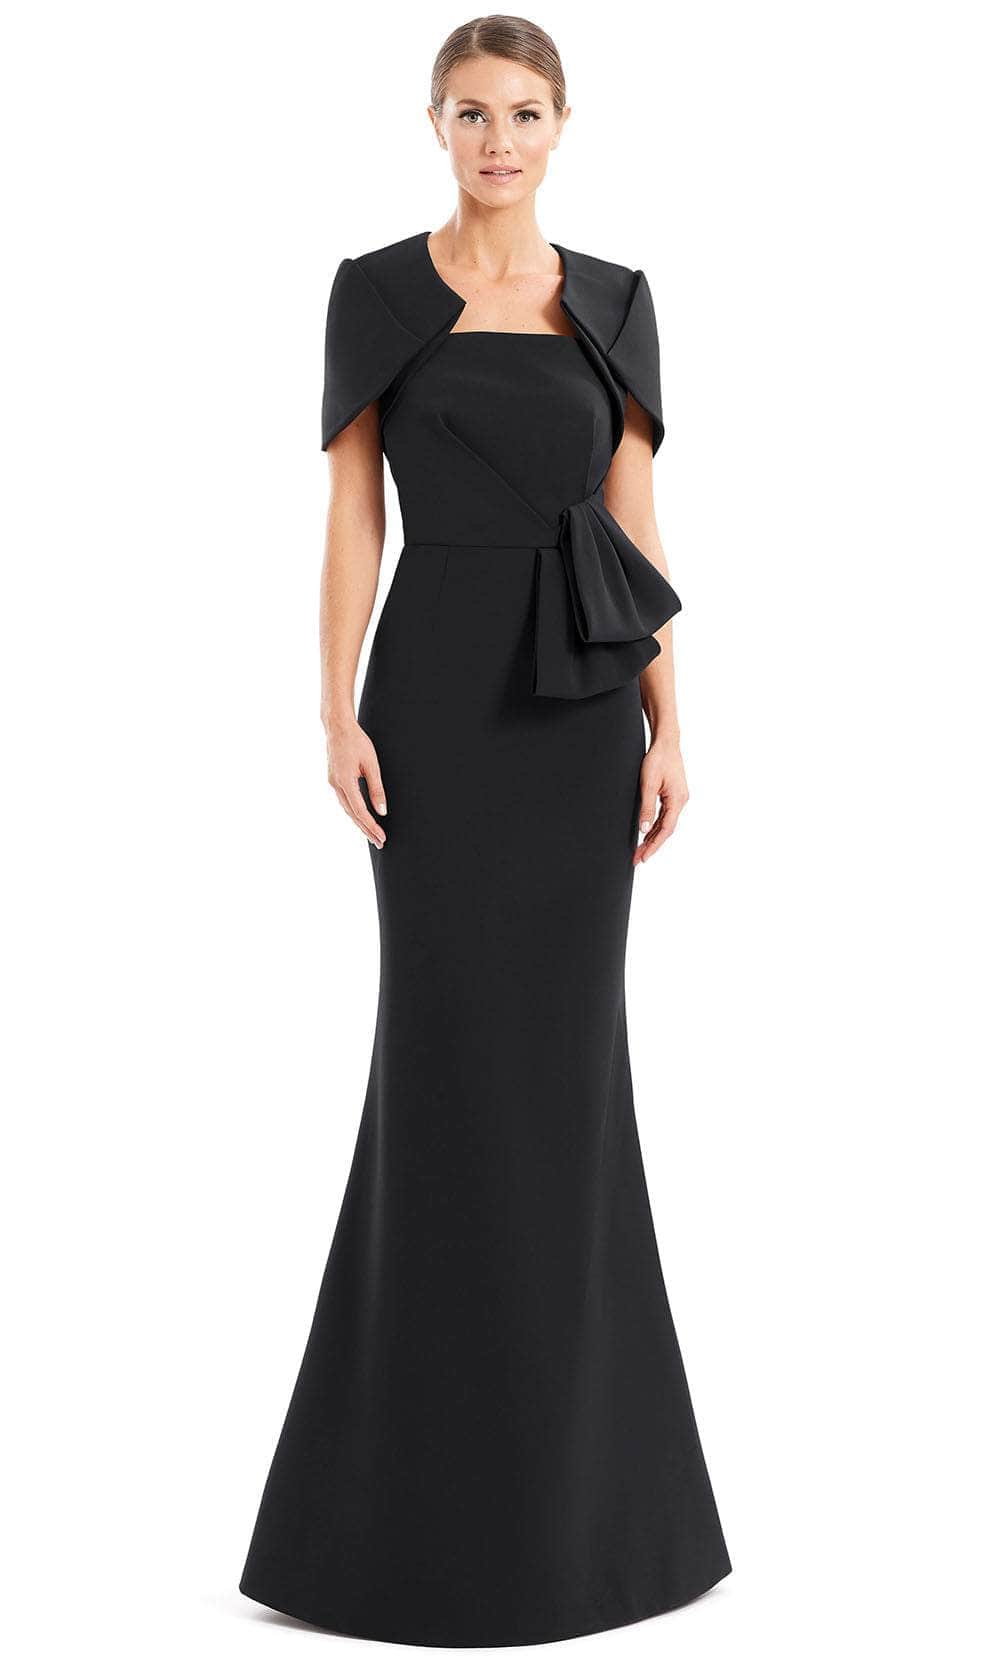 Alexander by Daymor 1656 - Peplum Detailed Straight-Across Neck Formal Gown With Jacket Evening Dresses 12 / Navy